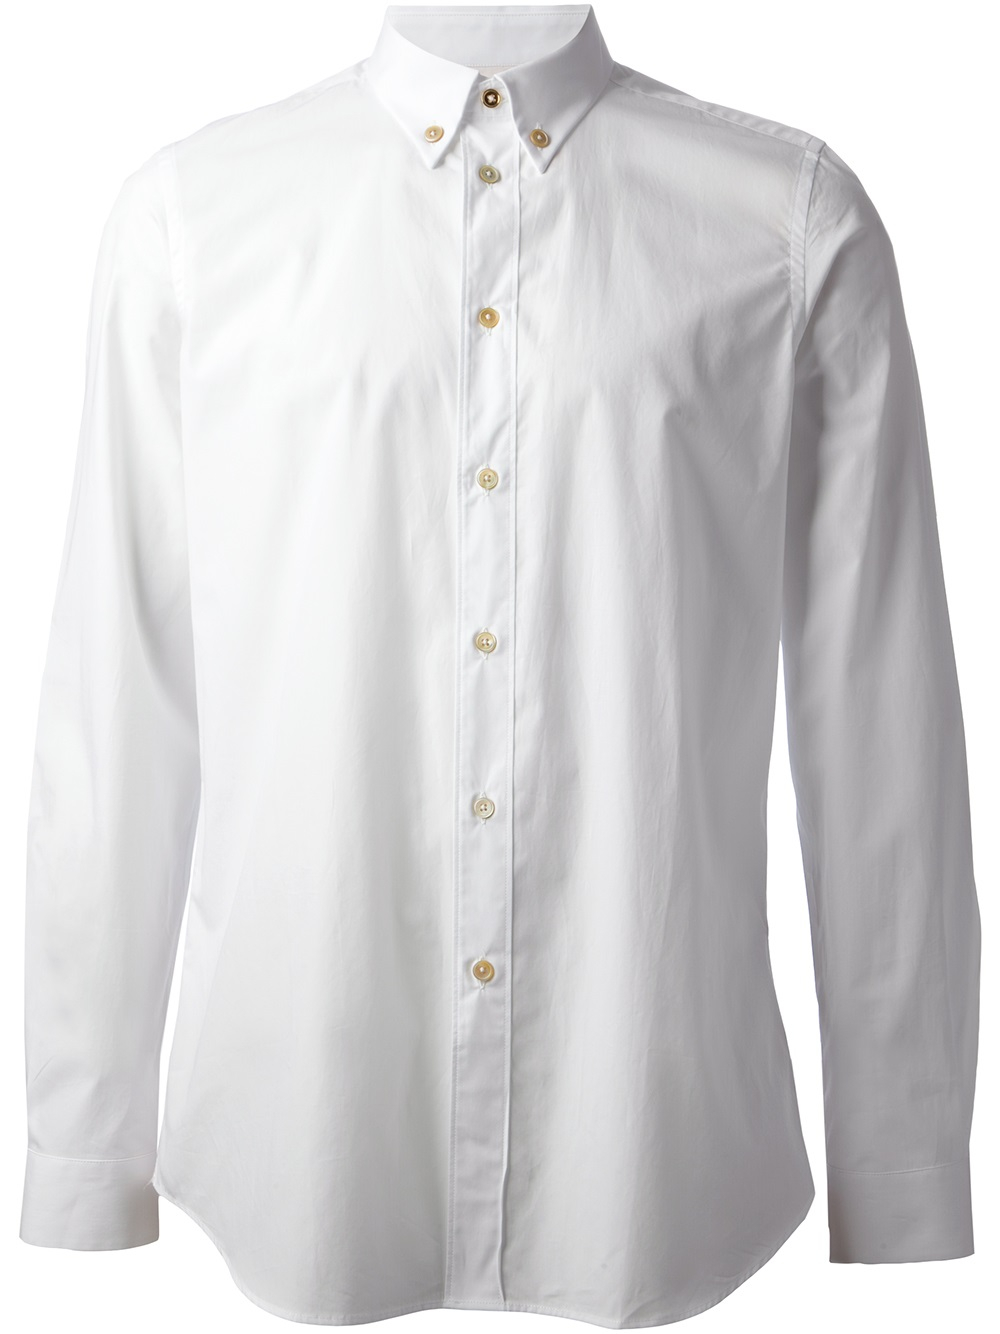 Paul Smith White Button Down Shirt Product 1 19041788 1 440598906 Normal 